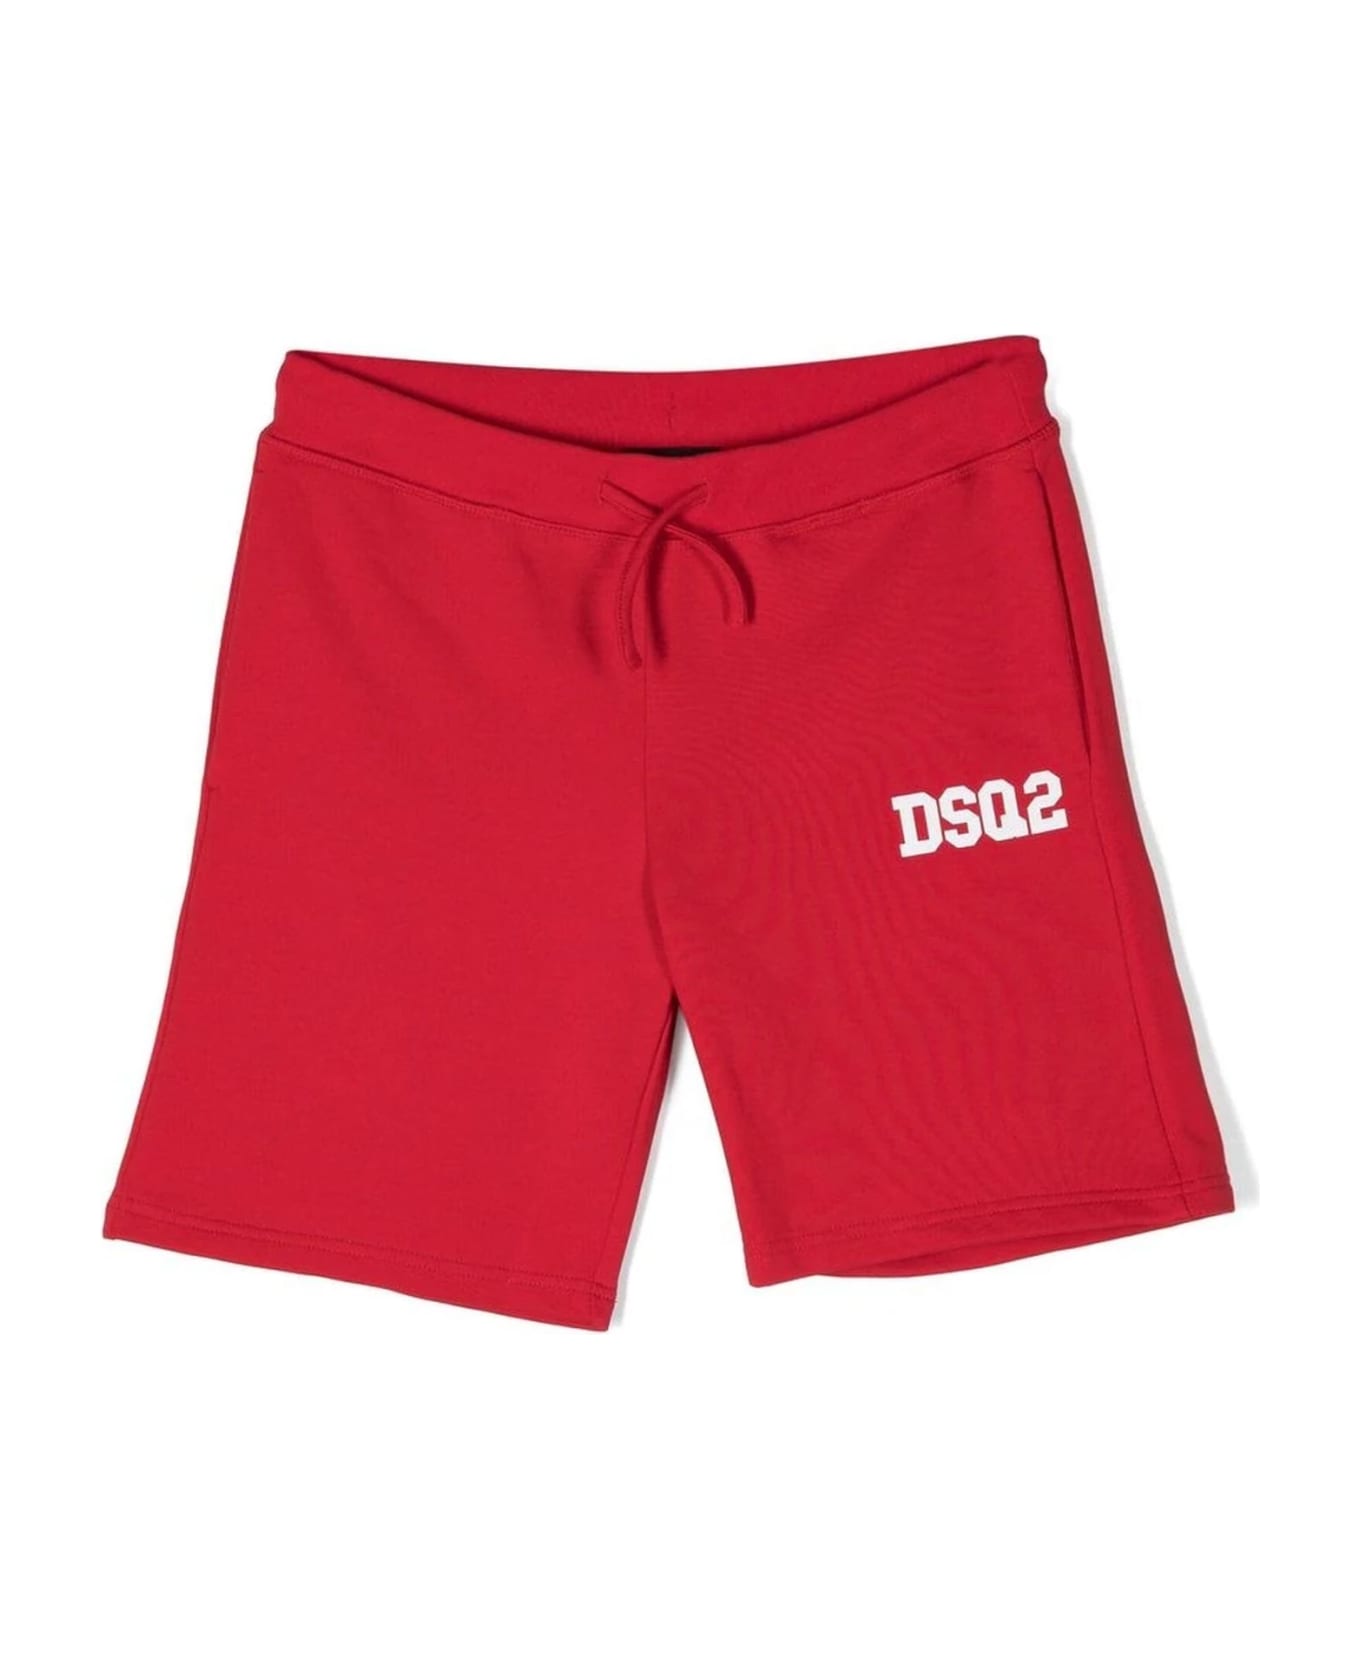 Dsquared2 Shorts Red - Red